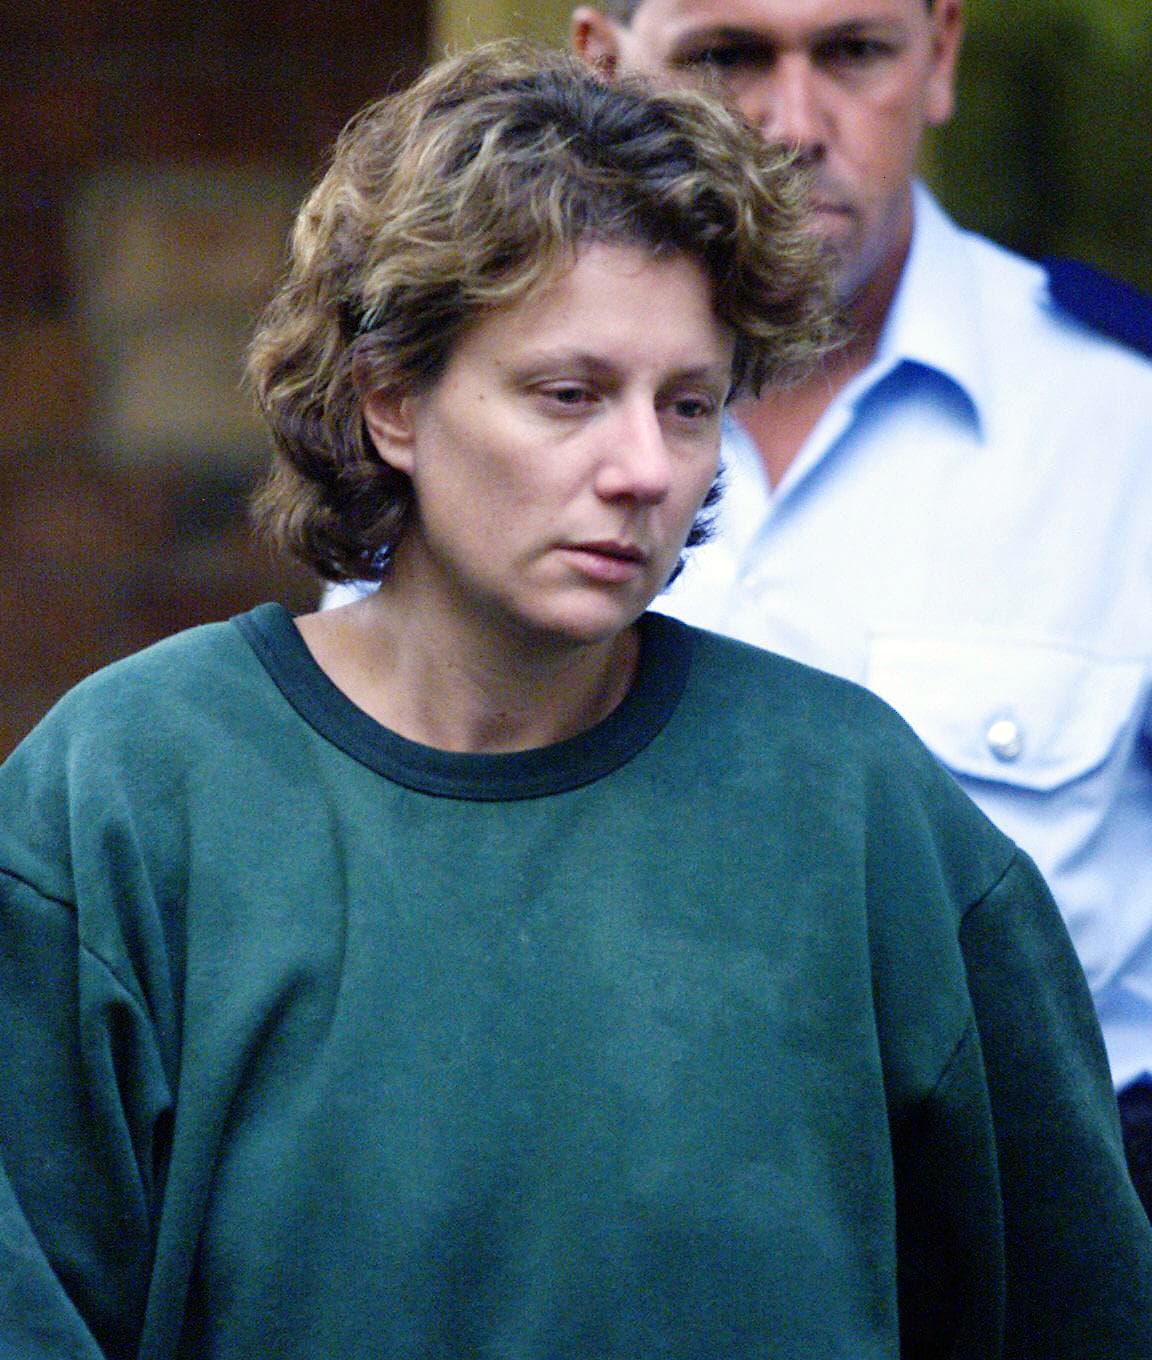 Mother who served 20 years over deaths of her 4 children is freed after new evidence